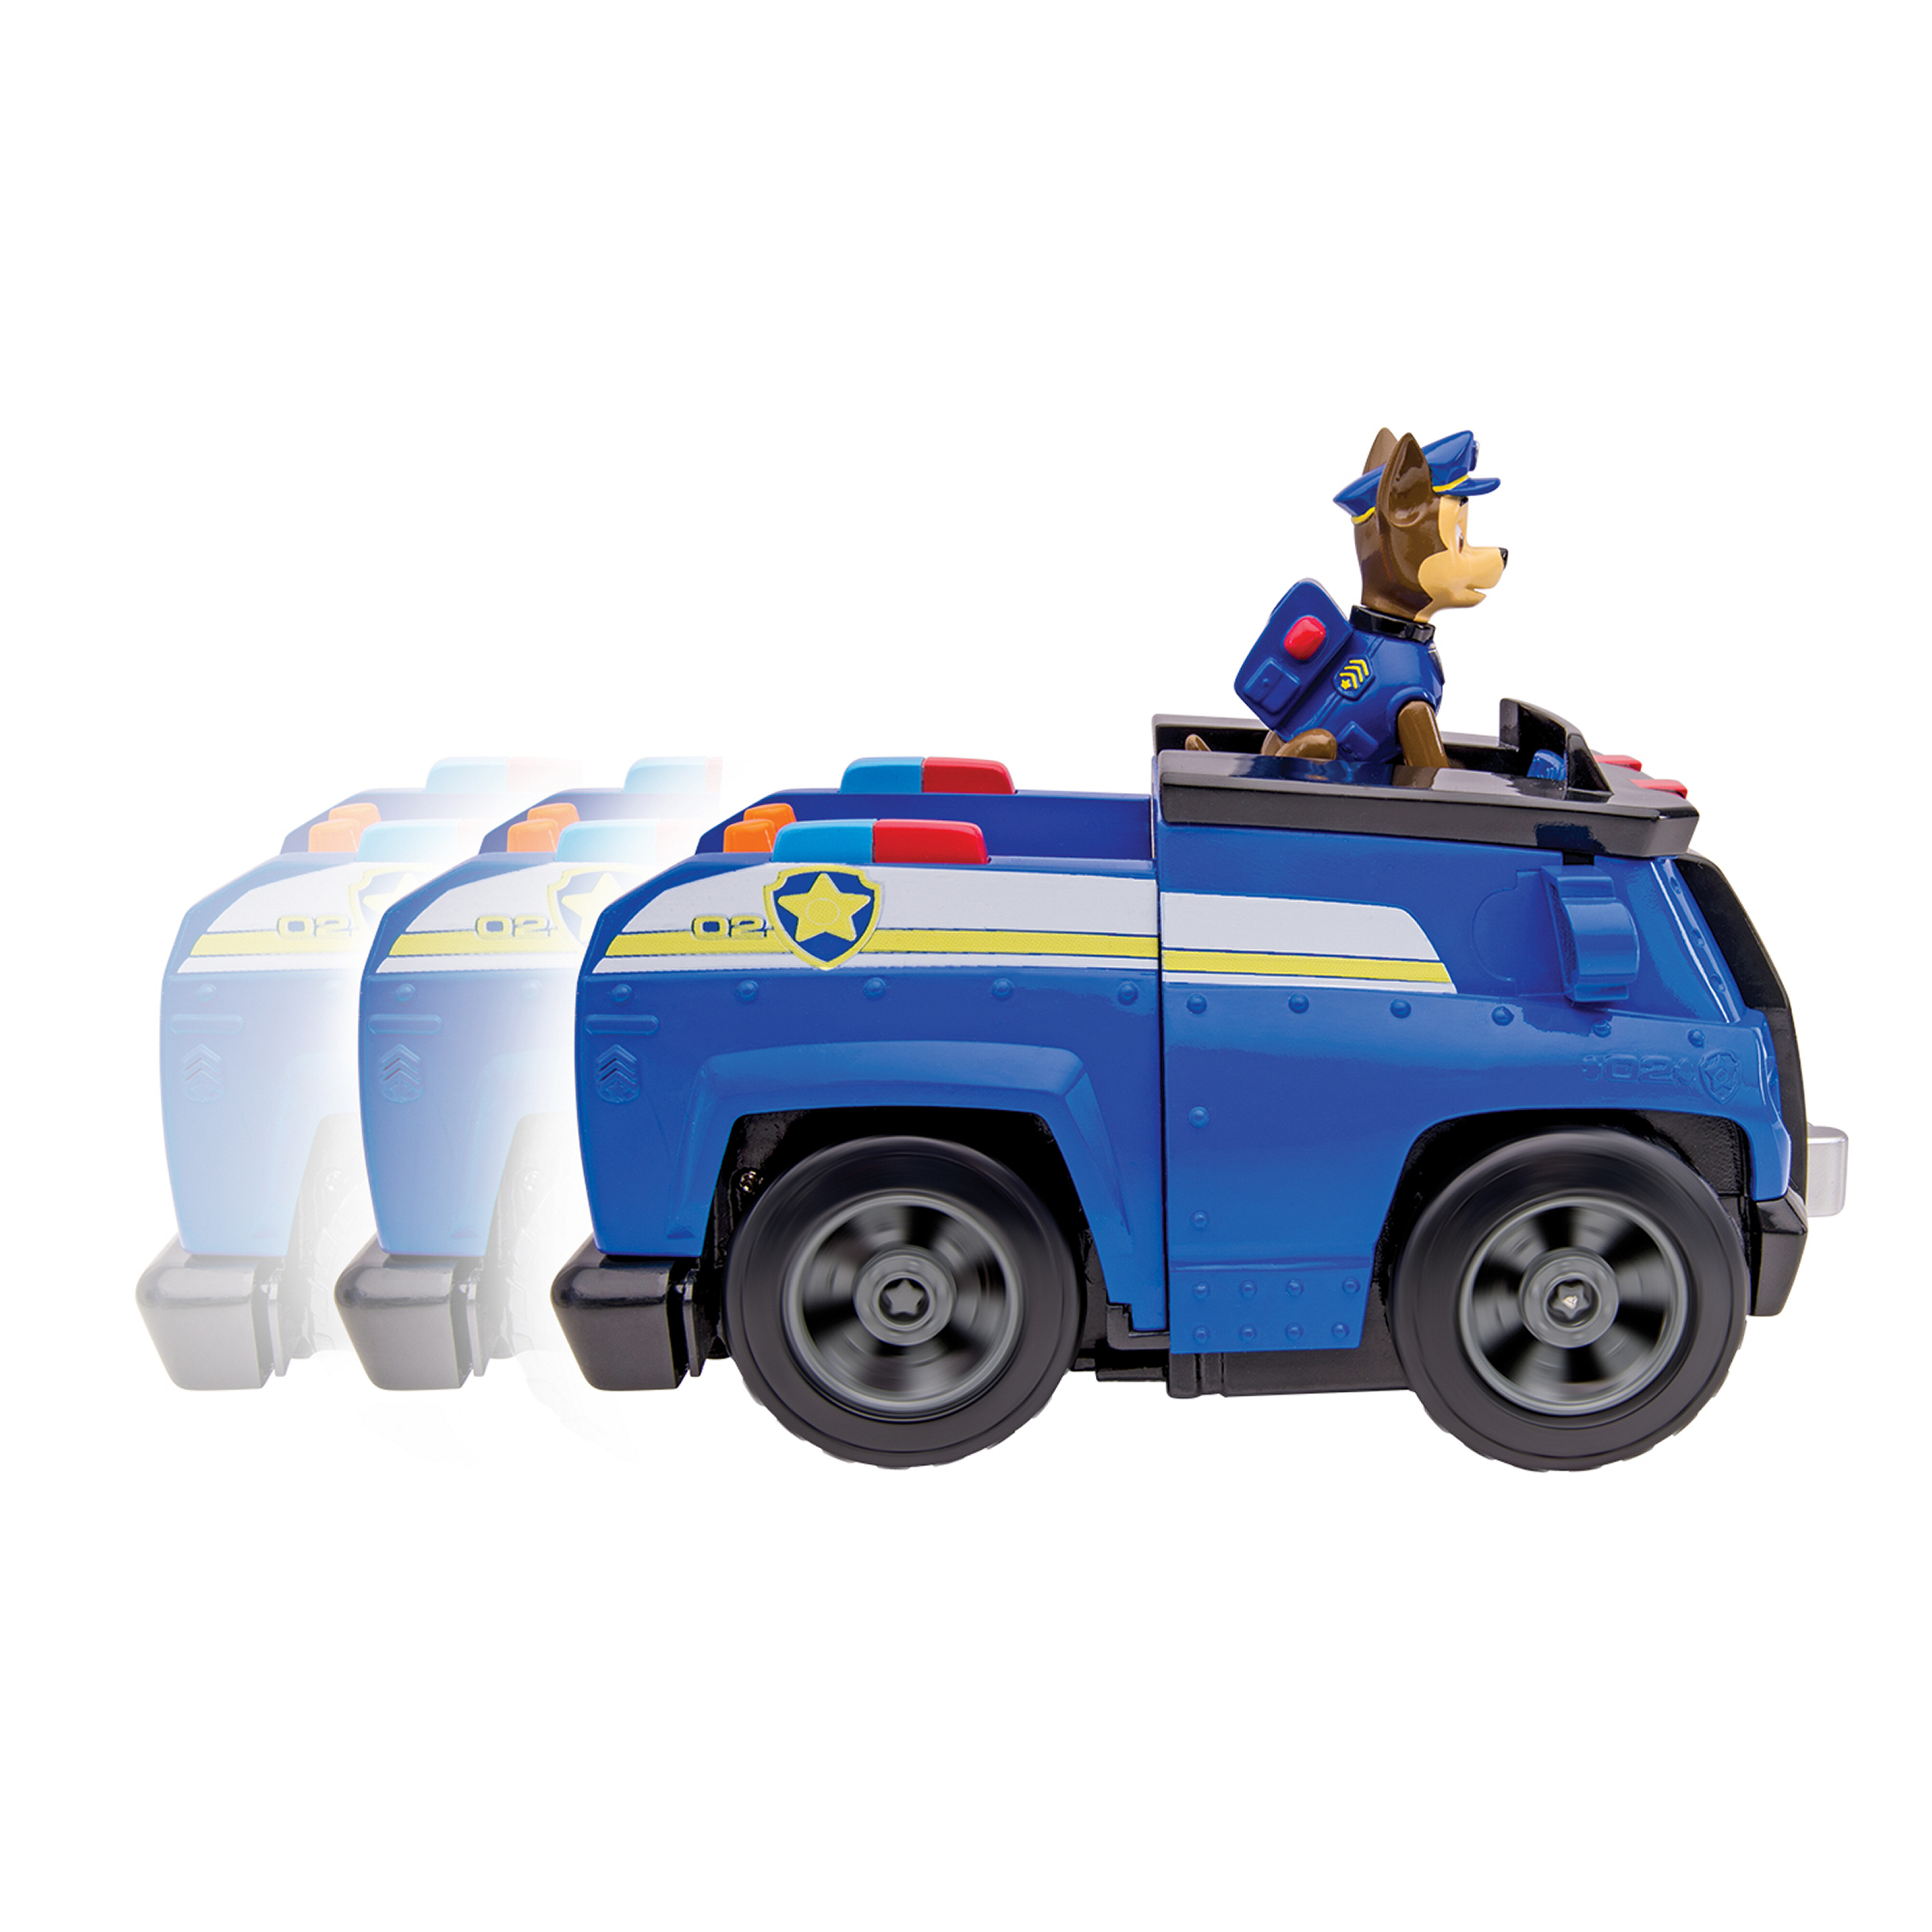 Paw Patrol On a Roll Chase, Figure and Vehicle with Sounds - image 2 of 5